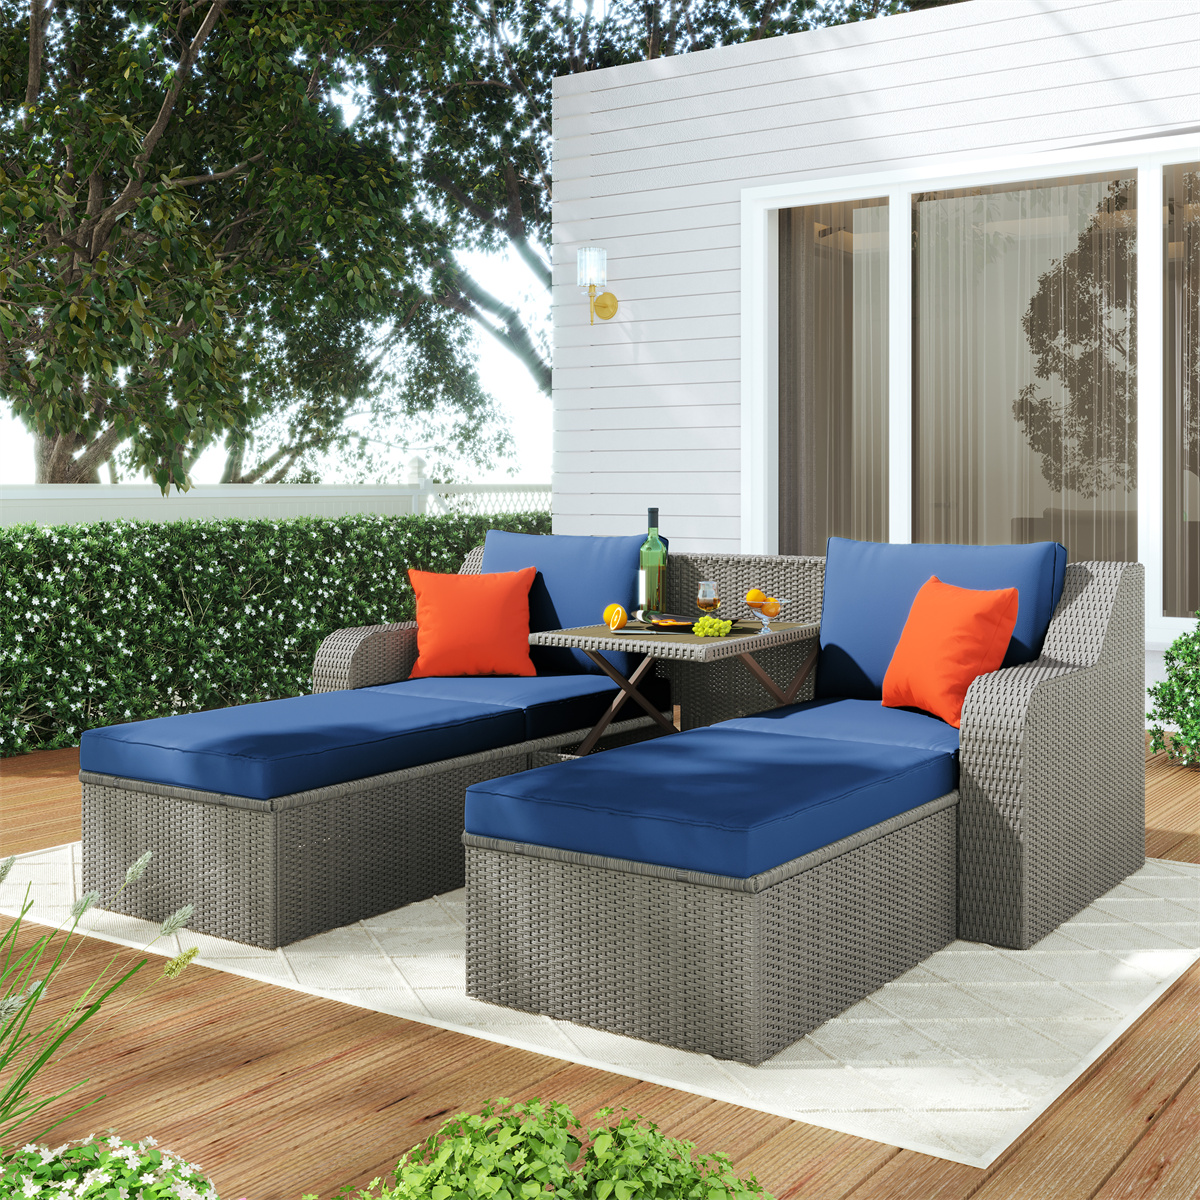 ARCTICSCORPION Patio Wicker Furniture Set,3-Piece Sectional Wicker Sofa with Cushions,Pillows,Ottomans and Lift Top Coffee Table,Outdoor Lounge Chair Conversation Set for Garden Backyard Deck,Blue - image 1 of 7